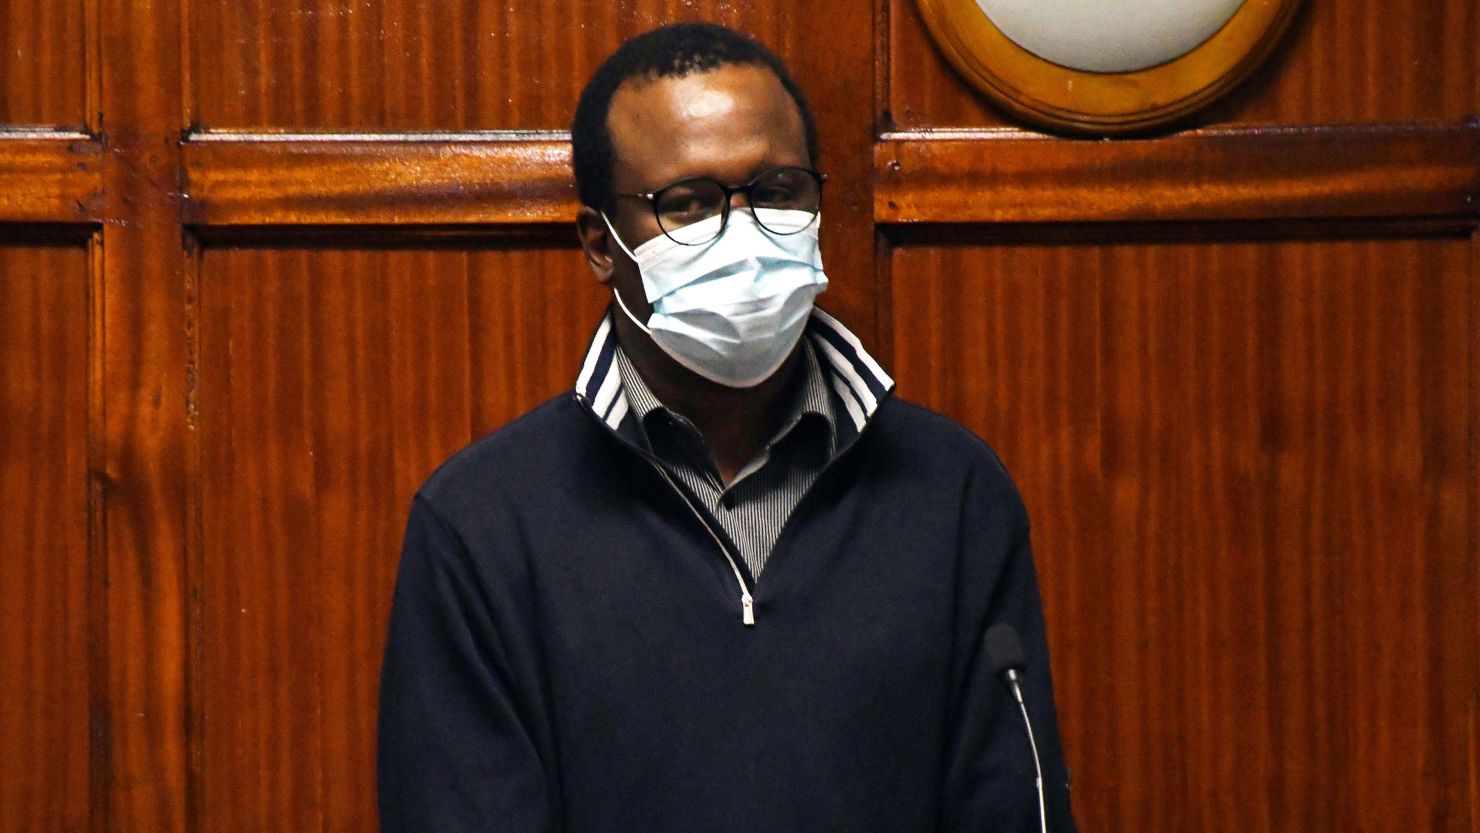 Kevin Kangethe, a suspect in the killing last fall of a nurse in Boston, appears before a judge Thursday in the Kenyan capital of Nairobi, where he was arrested this week.